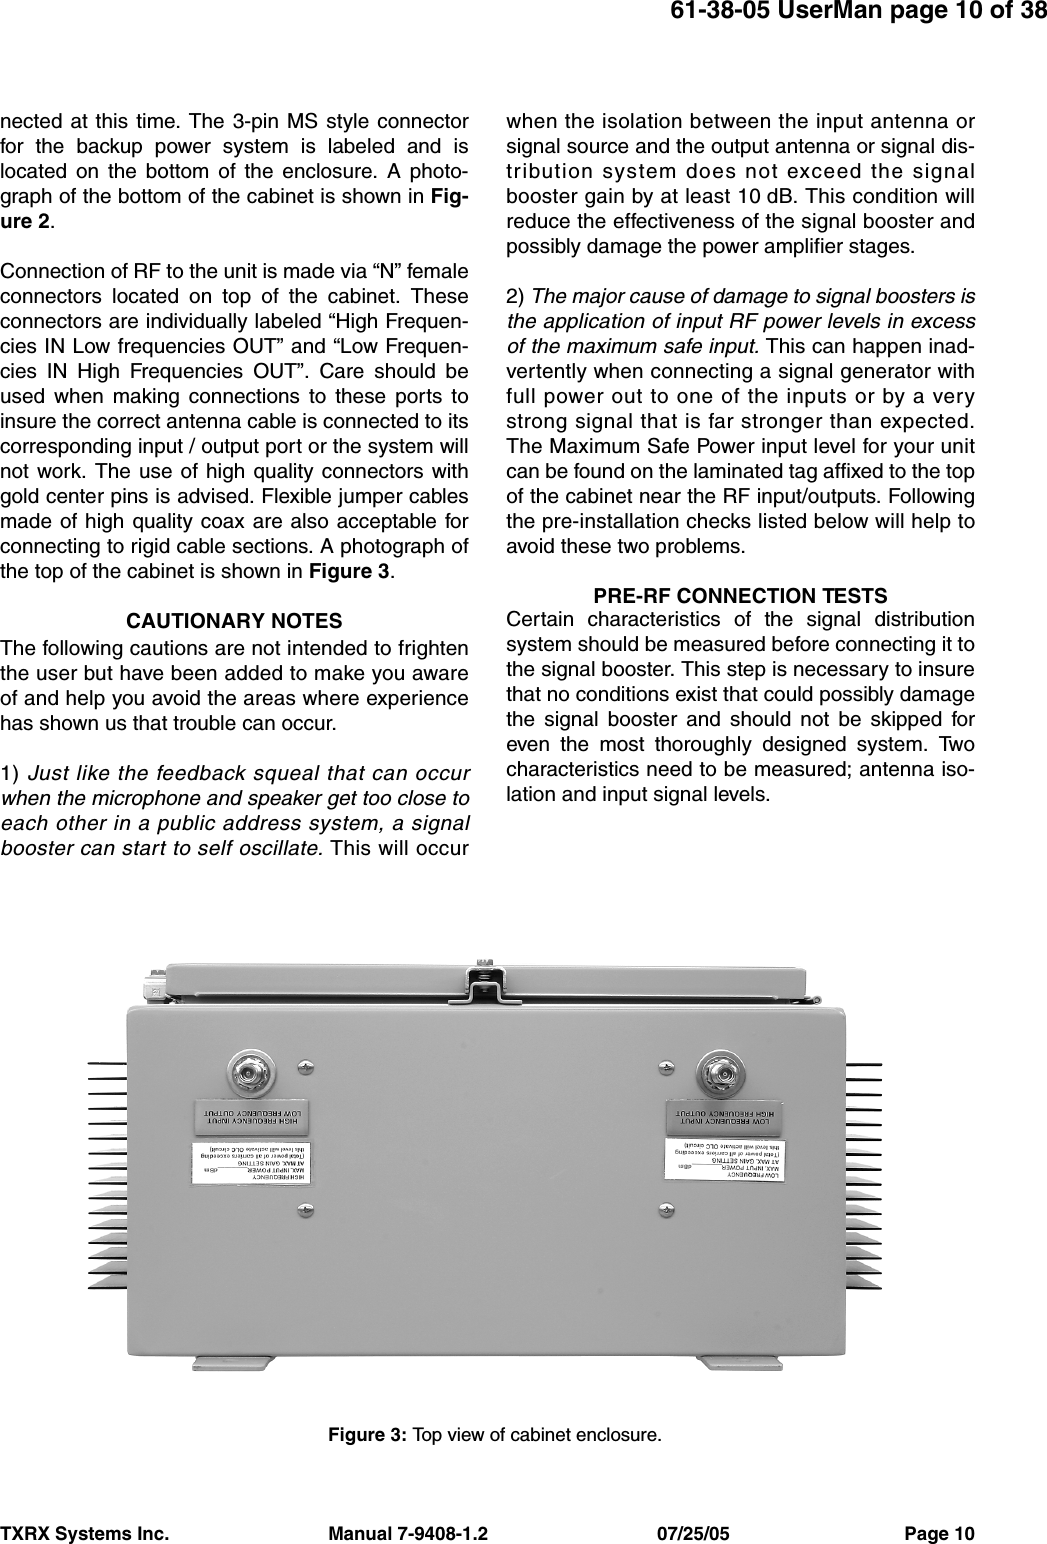 61-38-05 UserMan page 10 of 38TXRX Systems Inc.                               Manual 7-9408-1.2                                 07/25/05                                  Page 10nected at this time. The 3-pin MS style connectorfor the backup power system is labeled and islocated on the bottom of the enclosure. A photo-graph of the bottom of the cabinet is shown in Fig-ure 2.Connection of RF to the unit is made via “N” femaleconnectors located on top of the cabinet. Theseconnectors are individually labeled “High Frequen-cies IN Low frequencies OUT” and “Low Frequen-cies IN High Frequencies OUT”. Care should beused when making connections to these ports toinsure the correct antenna cable is connected to itscorresponding input / output port or the system willnot work. The use of high quality connectors withgold center pins is advised. Flexible jumper cablesmade of high quality coax are also acceptable forconnecting to rigid cable sections. A photograph ofthe top of the cabinet is shown in Figure 3.CAUTIONARY NOTESThe following cautions are not intended to frightenthe user but have been added to make you awareof and help you avoid the areas where experiencehas shown us that trouble can occur.1) Just like the feedback squeal that can occurwhen the microphone and speaker get too close toeach other in a public address system, a signalbooster can start to self oscillate. This will occurwhen the isolation between the input antenna orsignal source and the output antenna or signal dis-tribution system does not exceed the signalbooster gain by at least 10 dB. This condition willreduce the effectiveness of the signal booster andpossibly damage the power amplifier stages.2) The major cause of damage to signal boosters isthe application of input RF power levels in excessof the maximum safe input. This can happen inad-vertently when connecting a signal generator withfull power out to one of the inputs or by a verystrong signal that is far stronger than expected.The Maximum Safe Power input level for your unitcan be found on the laminated tag affixed to the topof the cabinet near the RF input/outputs. Followingthe pre-installation checks listed below will help toavoid these two problems.PRE-RF CONNECTION TESTSCertain characteristics of the signal distributionsystem should be measured before connecting it tothe signal booster. This step is necessary to insurethat no conditions exist that could possibly damagethe signal booster and should not be skipped foreven the most thoroughly designed system. Twocharacteristics need to be measured; antenna iso-lation and input signal levels.Figure 3: Top view of cabinet enclosure.